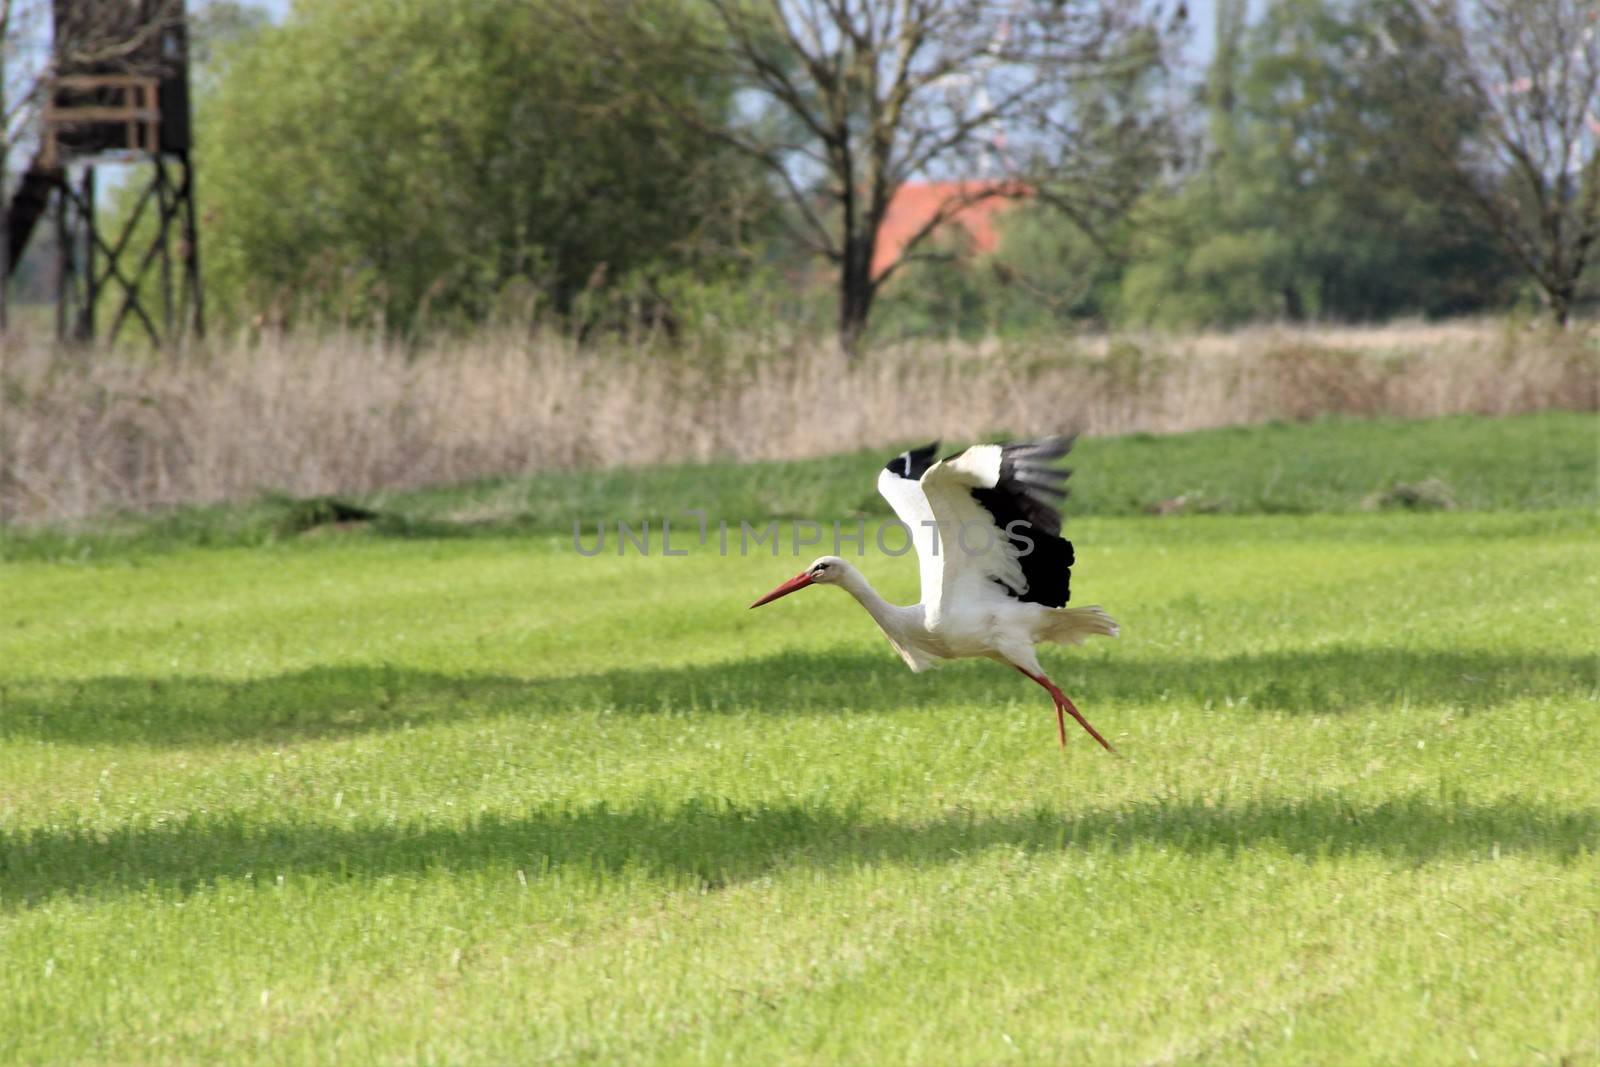 A white storck in flight on a mown grenn pasture